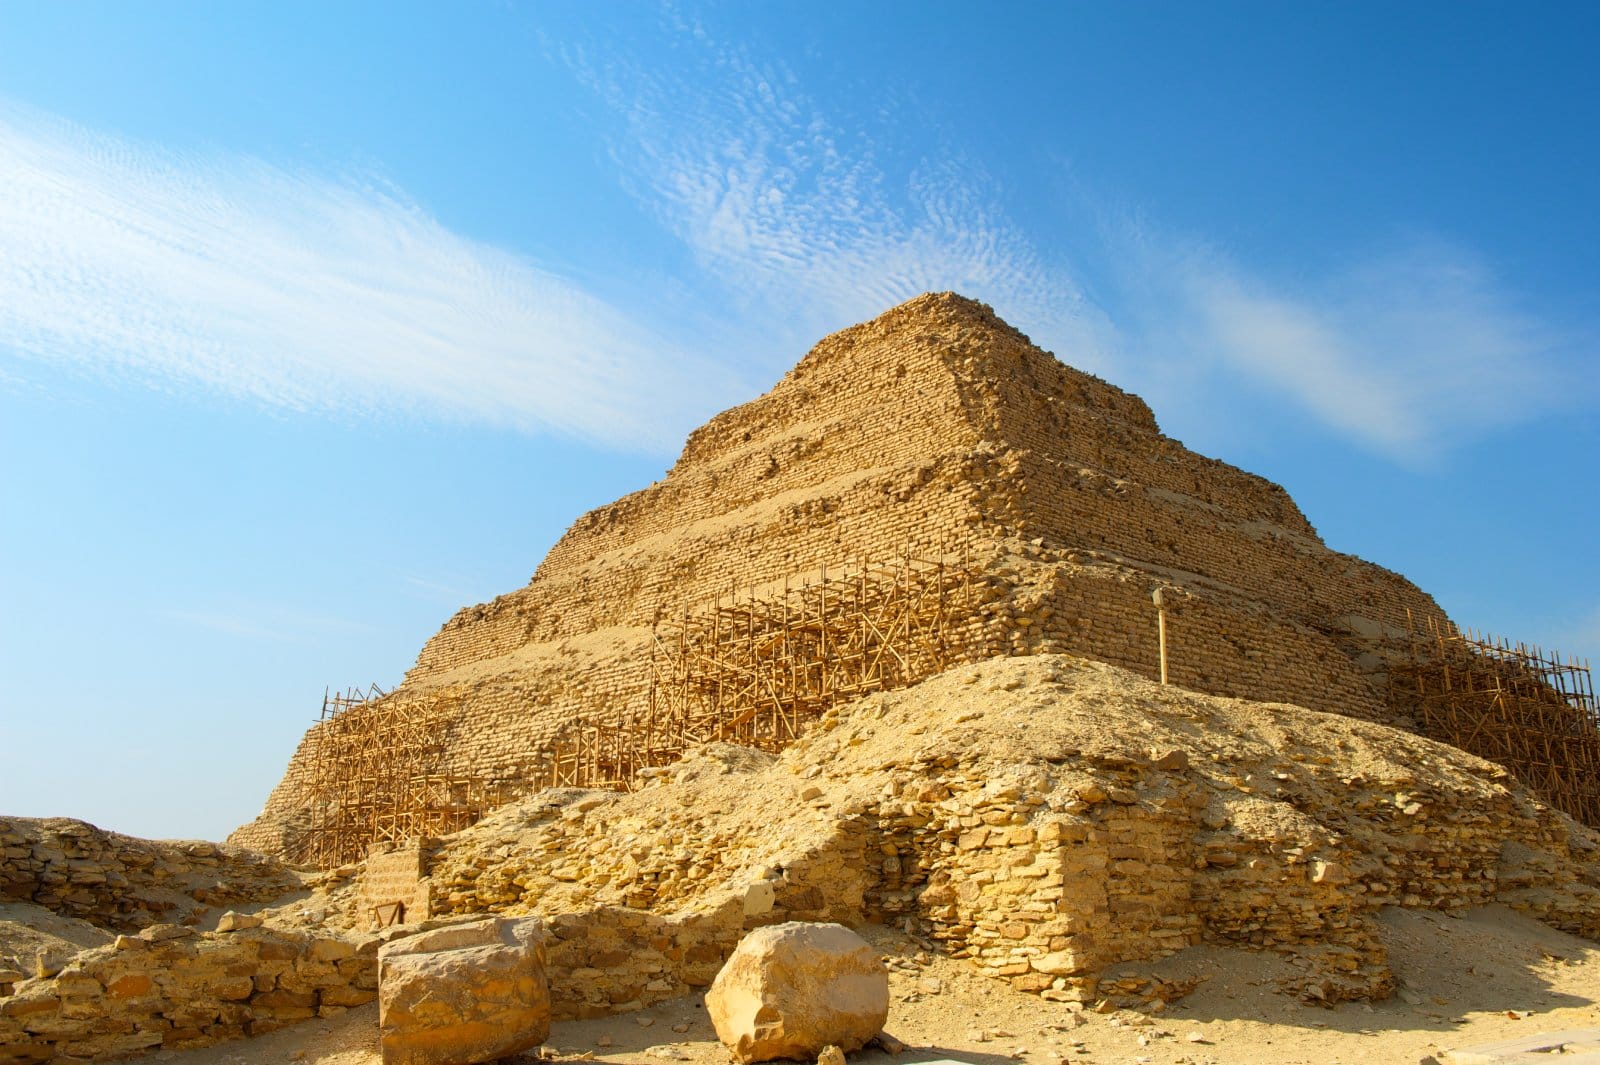 <p class="wp-caption-text">Image Credit: Shutterstock / Arthit Kaeoratanapattama</p>  <p><span>Saqqara, home to the Step Pyramid of Djoser, is one of Egypt’s most significant archaeological sites, offering insights into early pyramid construction techniques. The site includes tombs, temples, and the Imhotep Museum, dedicated to the Step Pyramid’s architect.</span></p>